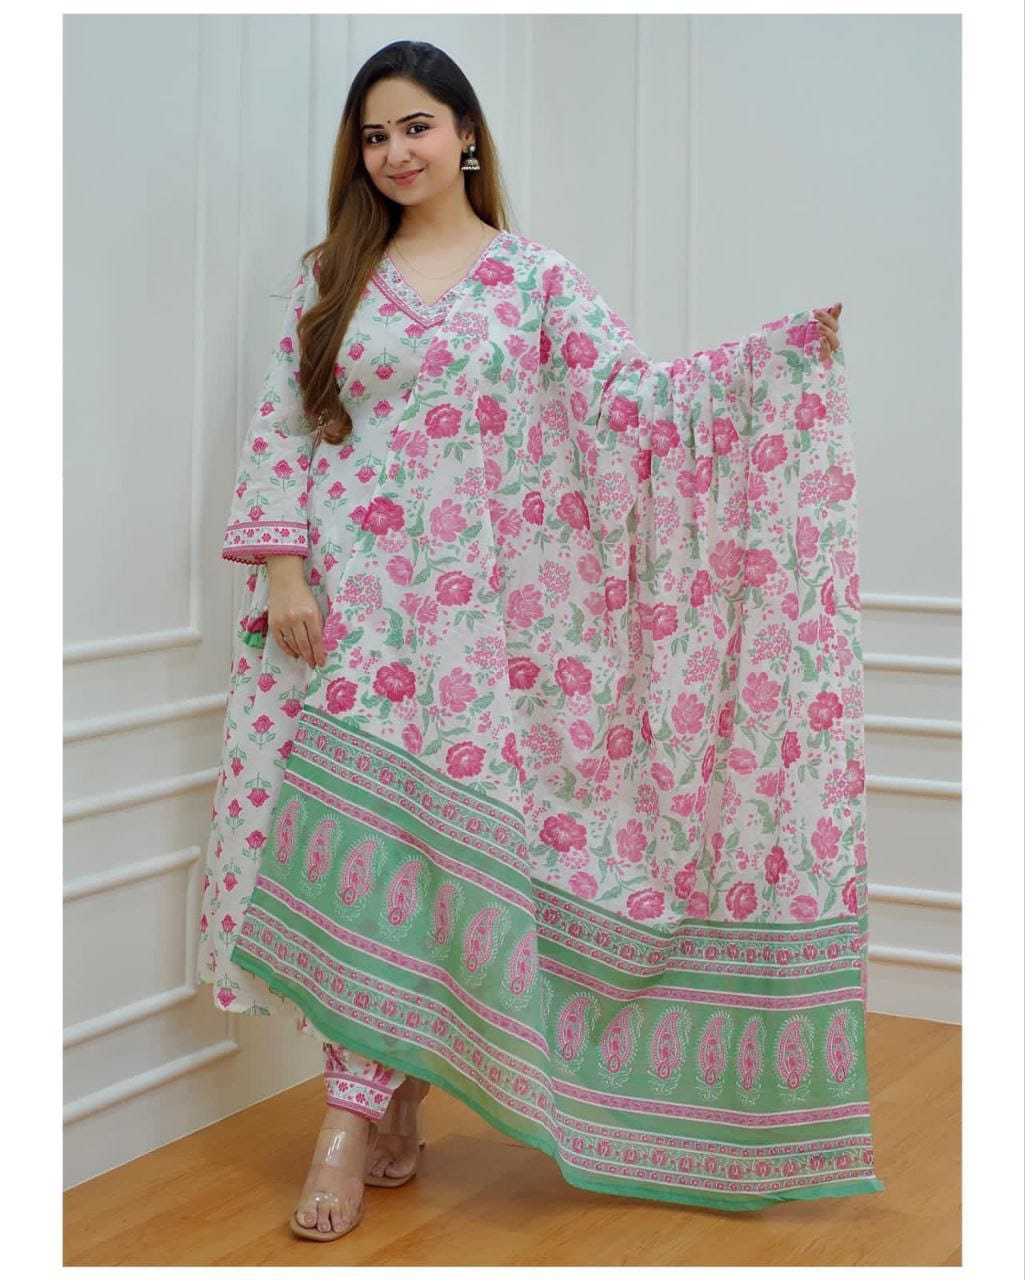 White-Pink Floral Afghani Suit Set with Afghani Pants and Dupatta